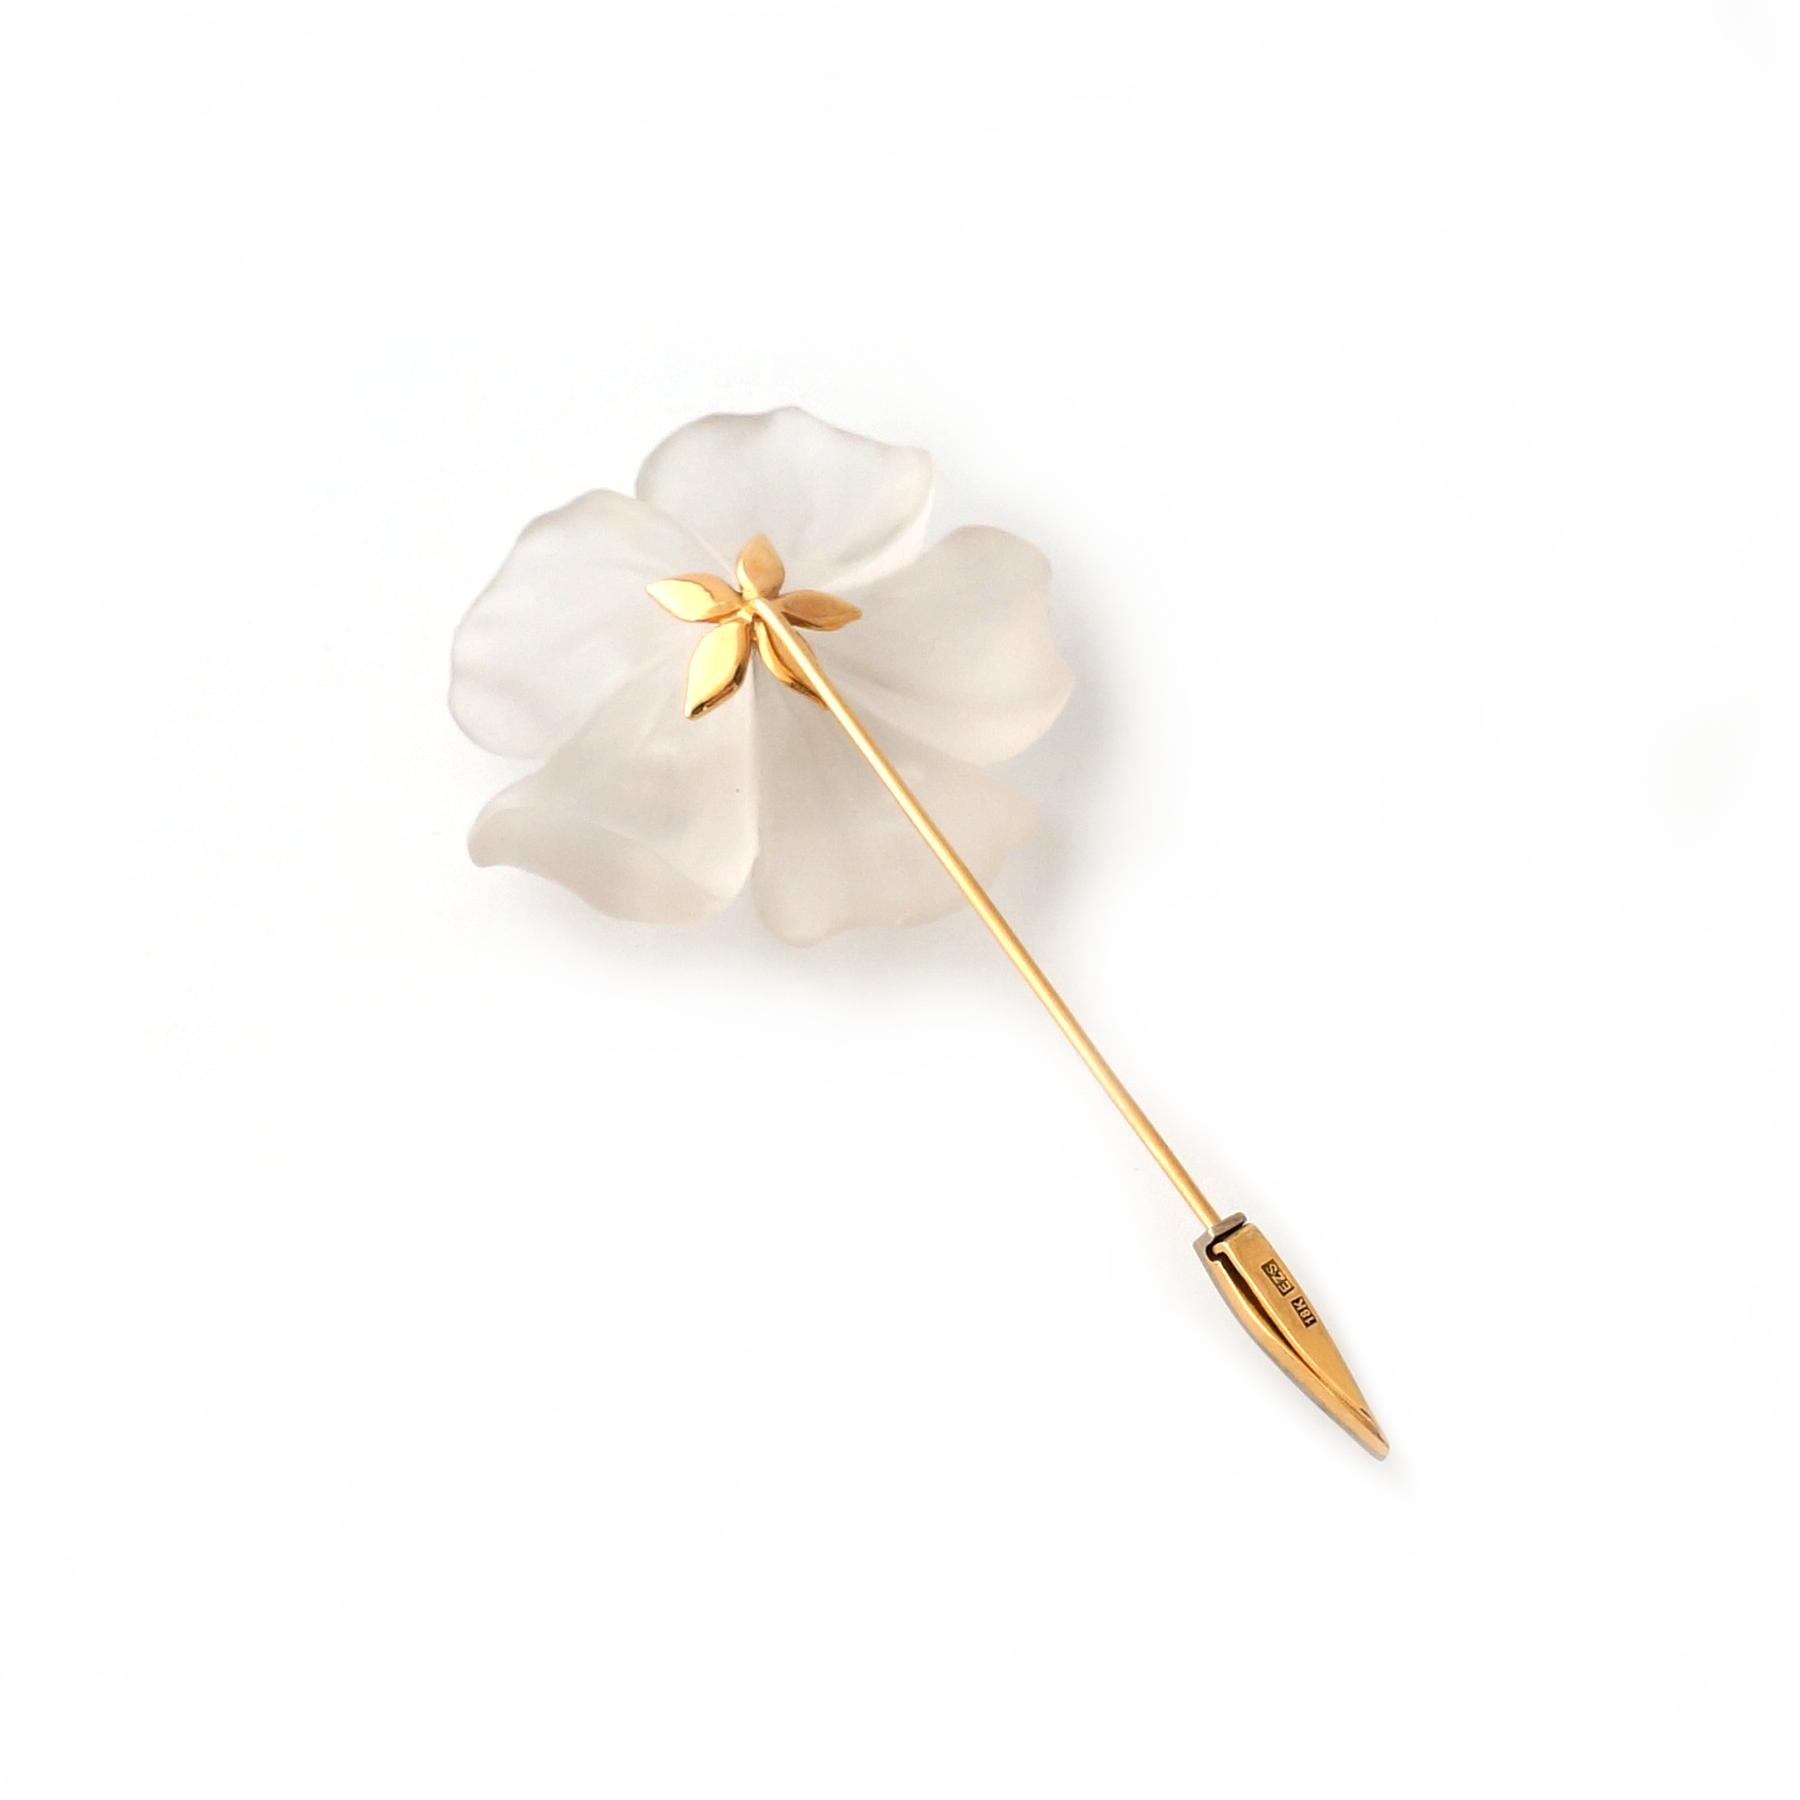 18K gold flower pin with hand-carved rock crystal with white diamonds by Ewa Z. Sleziona Jewels